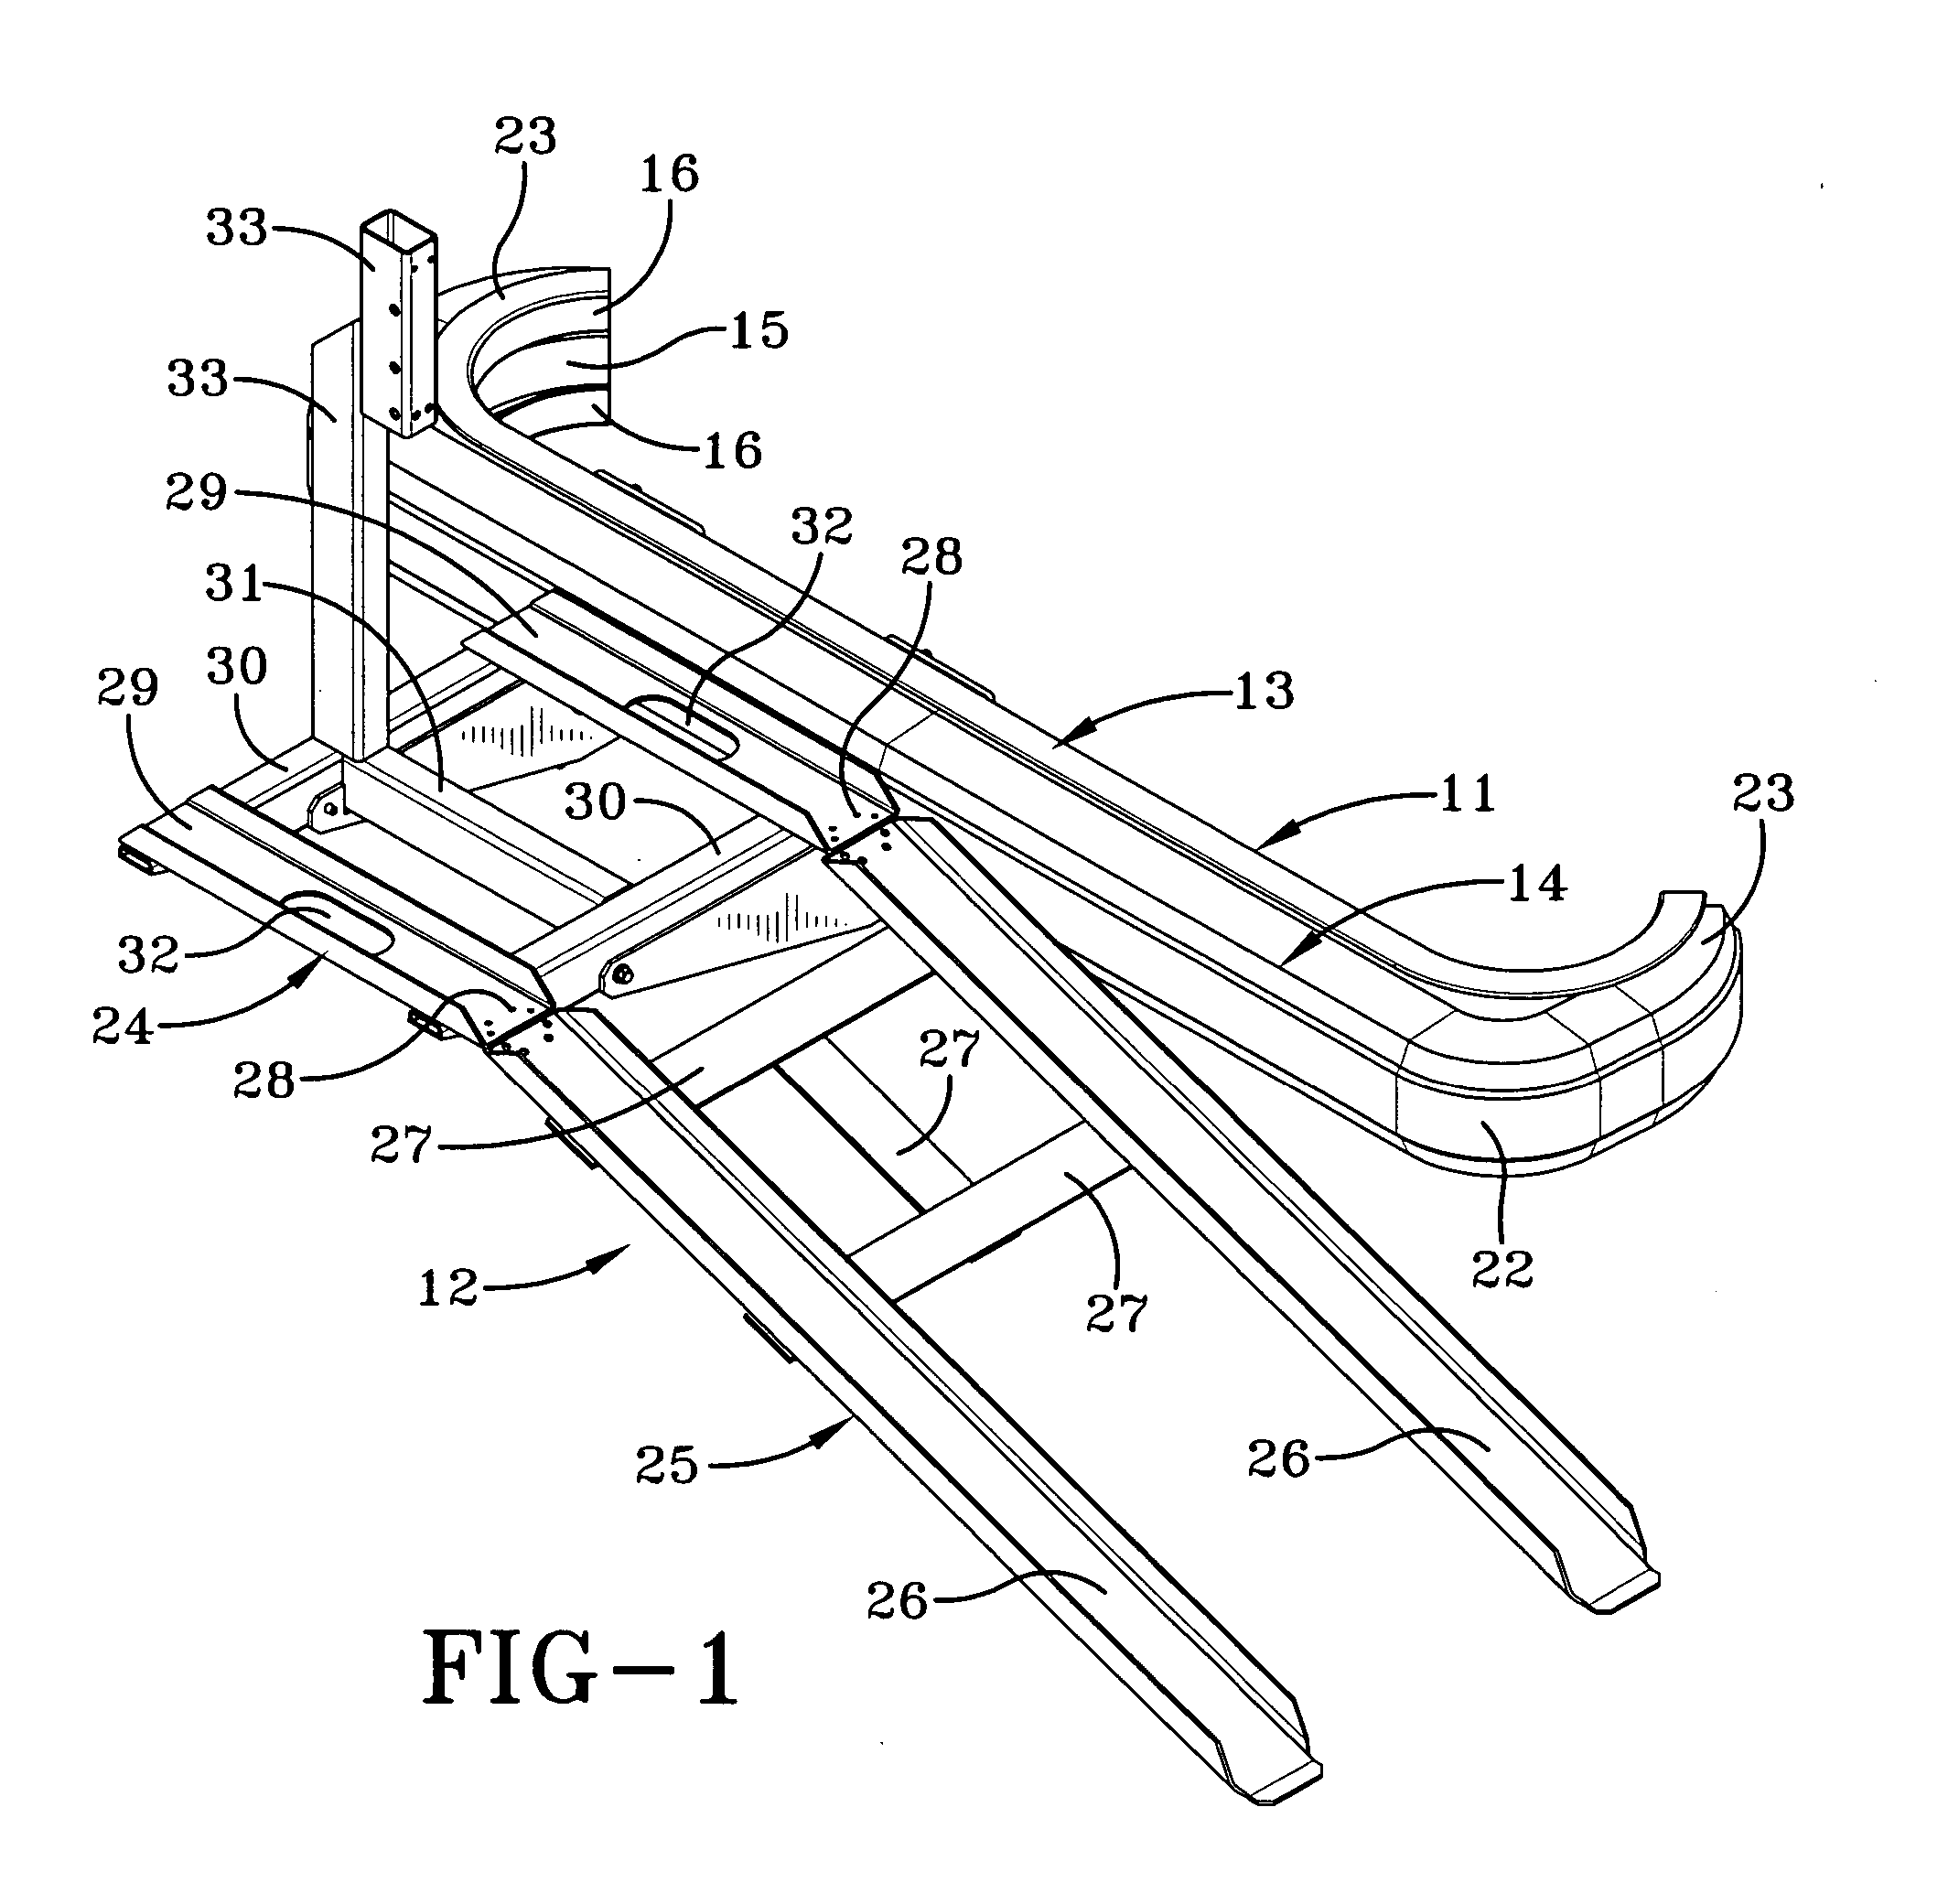 Energy absorbing system for attaching a trailing device to a vehicle